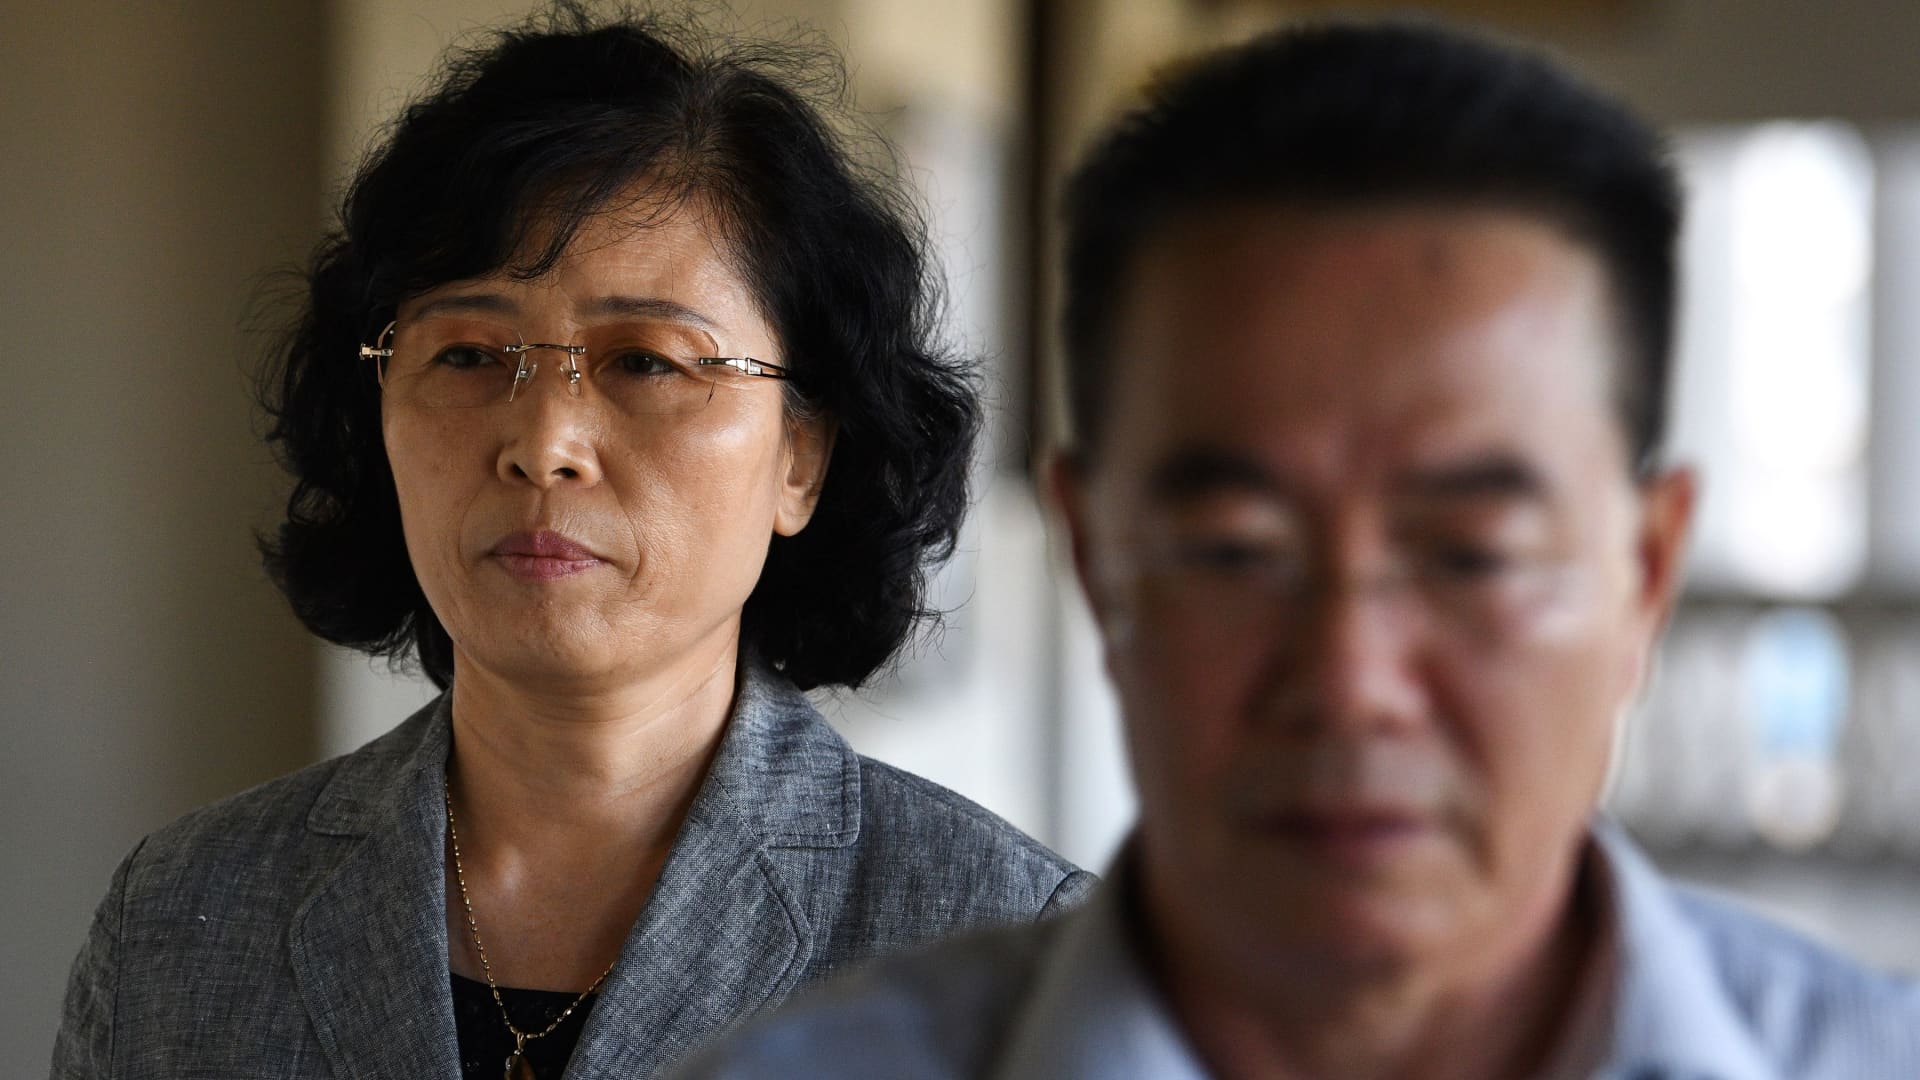 Kang Son Bi (L) wife of Mun Chol Myong, the North Korean man who faces possible extradition from Malaysia to the US on money-laundering charges arrives at the High Court in Kuala Lumpur on December 6, 2019.